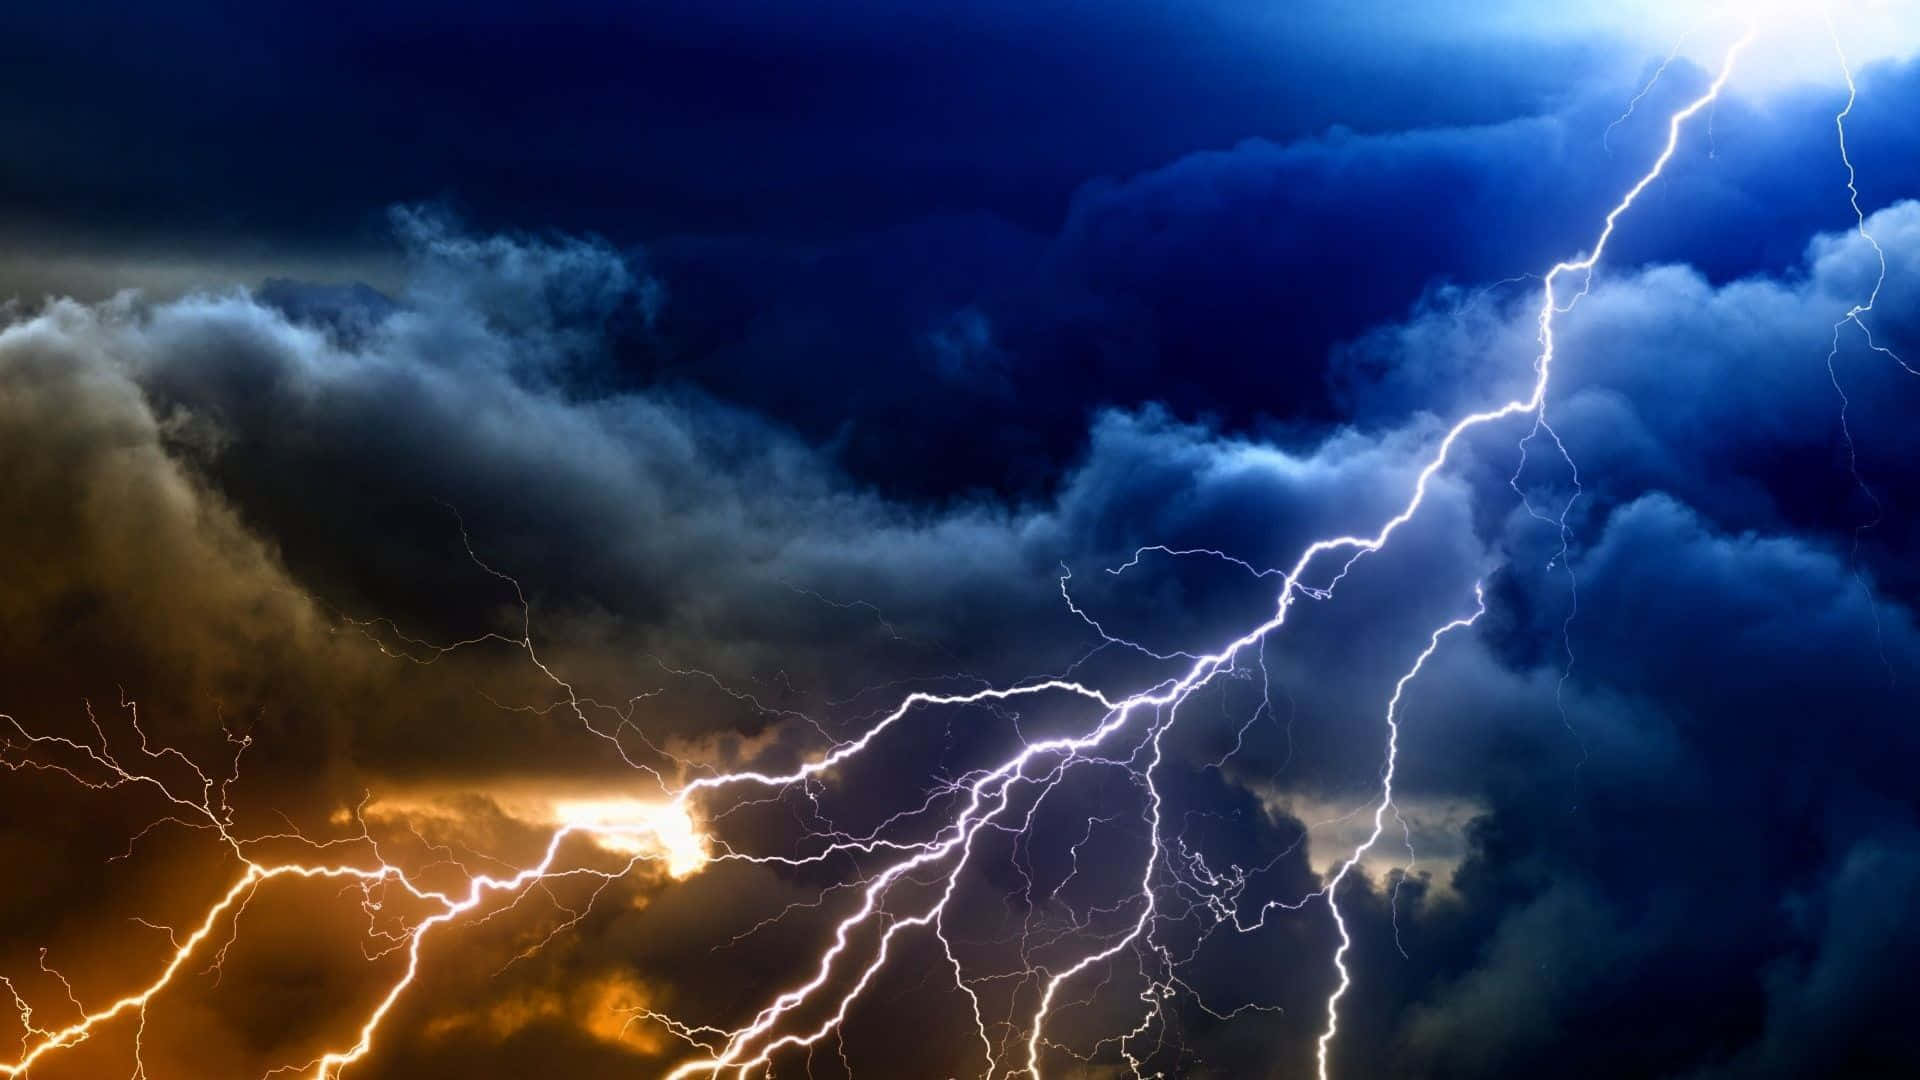 Experience The Power Of Nature, Feel The Blue Lightning! Background